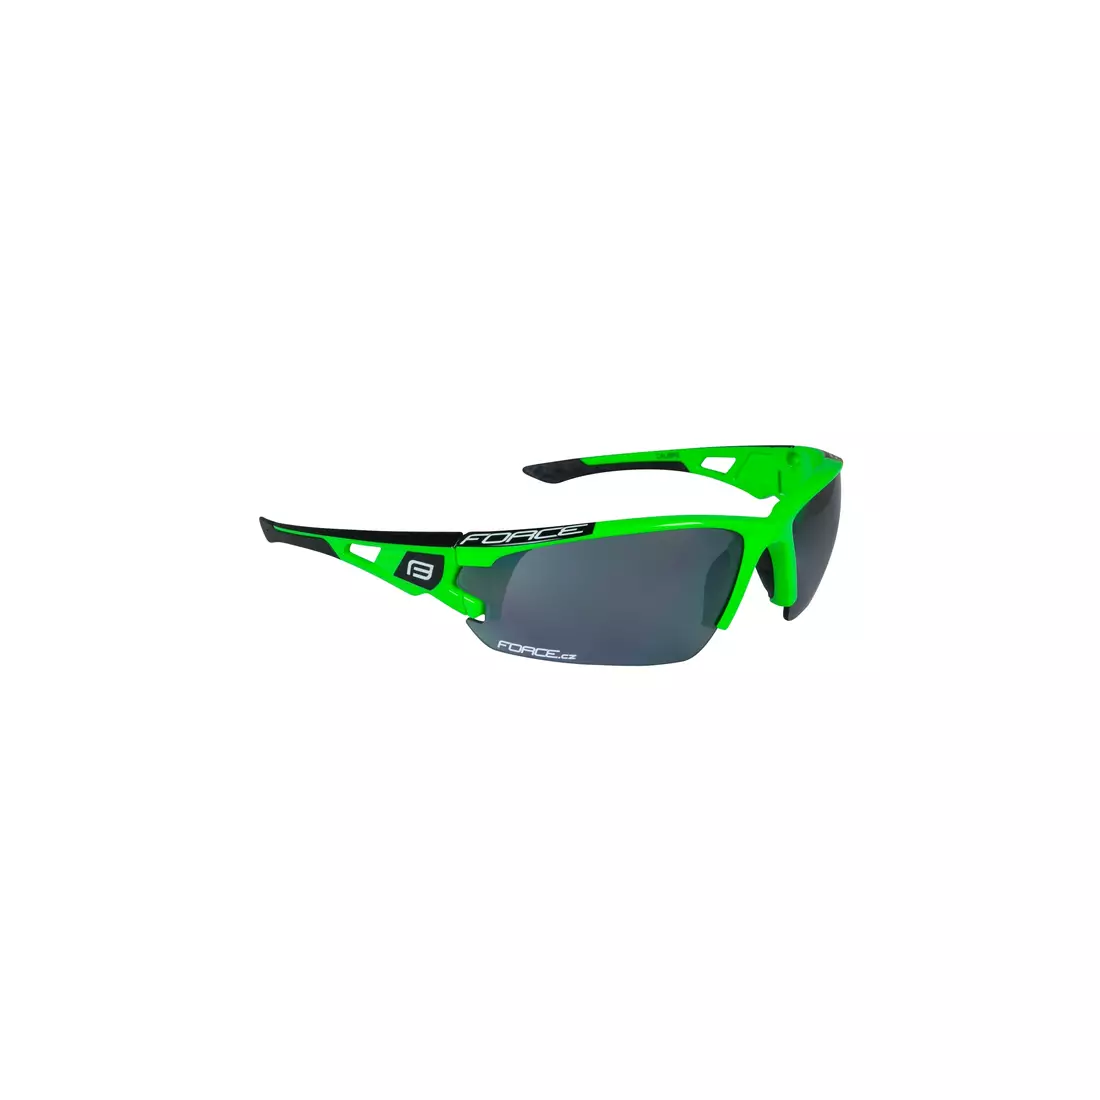 FORCE CALIBRE glasses with replaceable lenses, green 91050